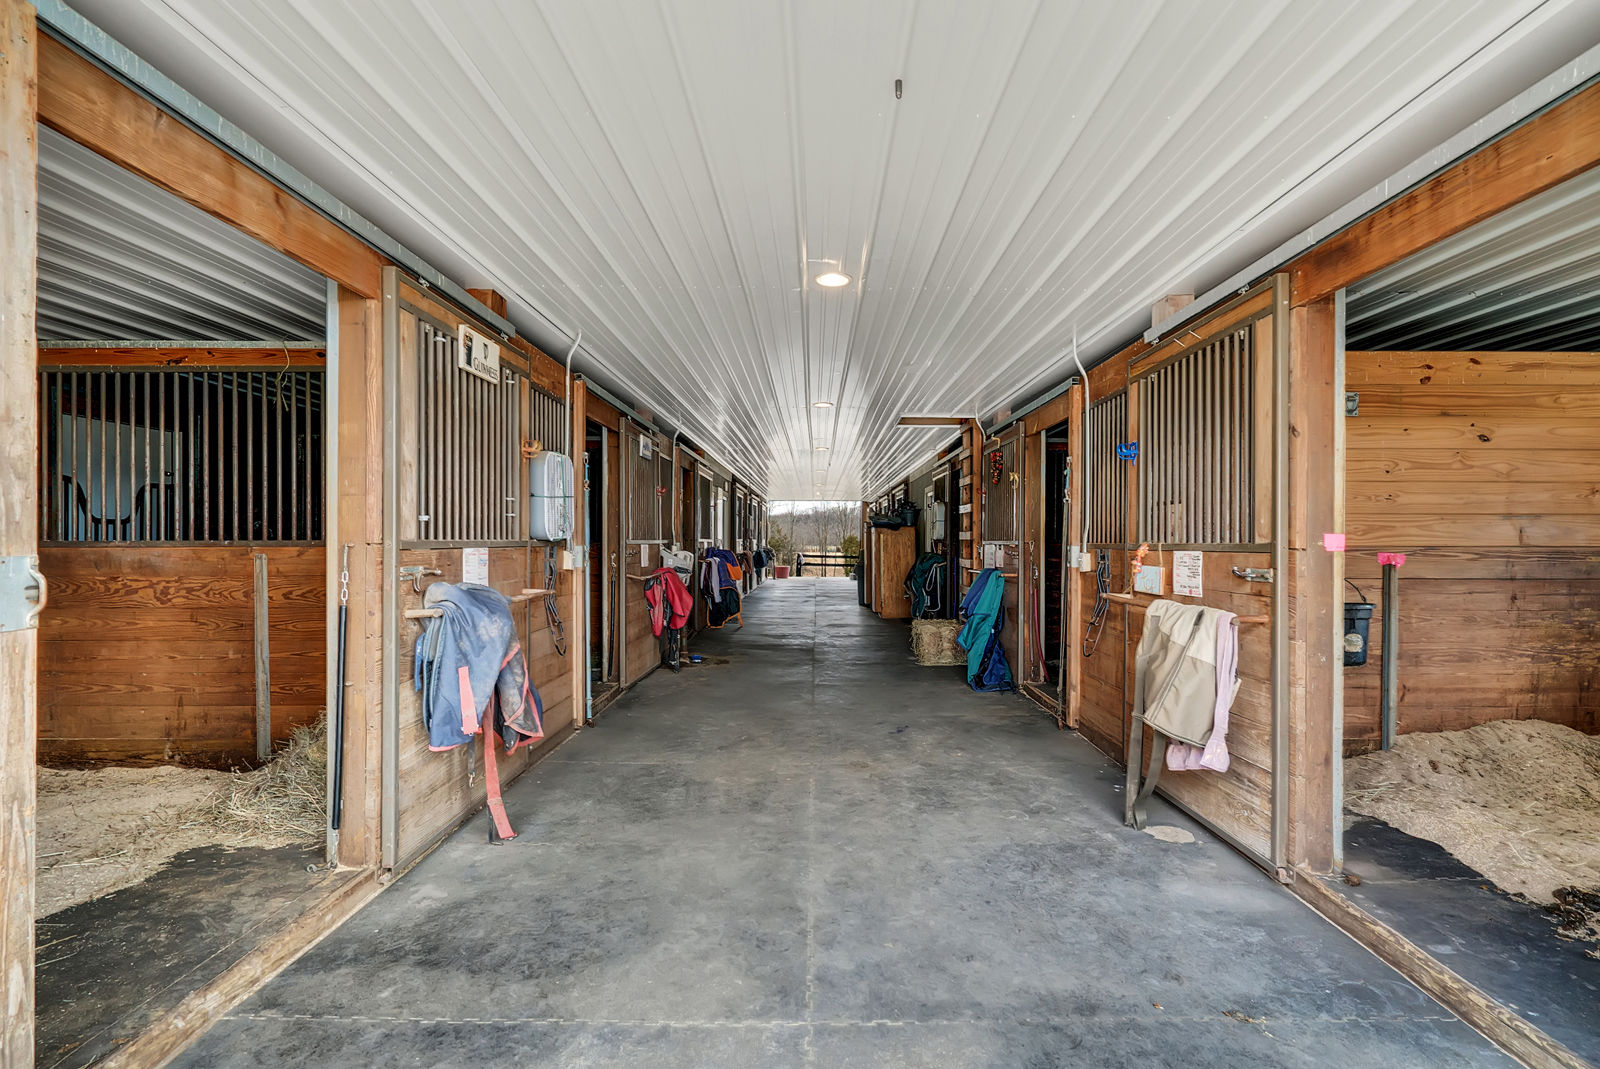 The property also includes an 11,200-square-foot indoor riding arena, two show arenas and stables and offers boarding and training. It also hosts regular events, including seven Virginia Horse Show Association Hunter/Jumper shows booked for 2017, according to the listing. (Courtesy Auction Markets LLC)